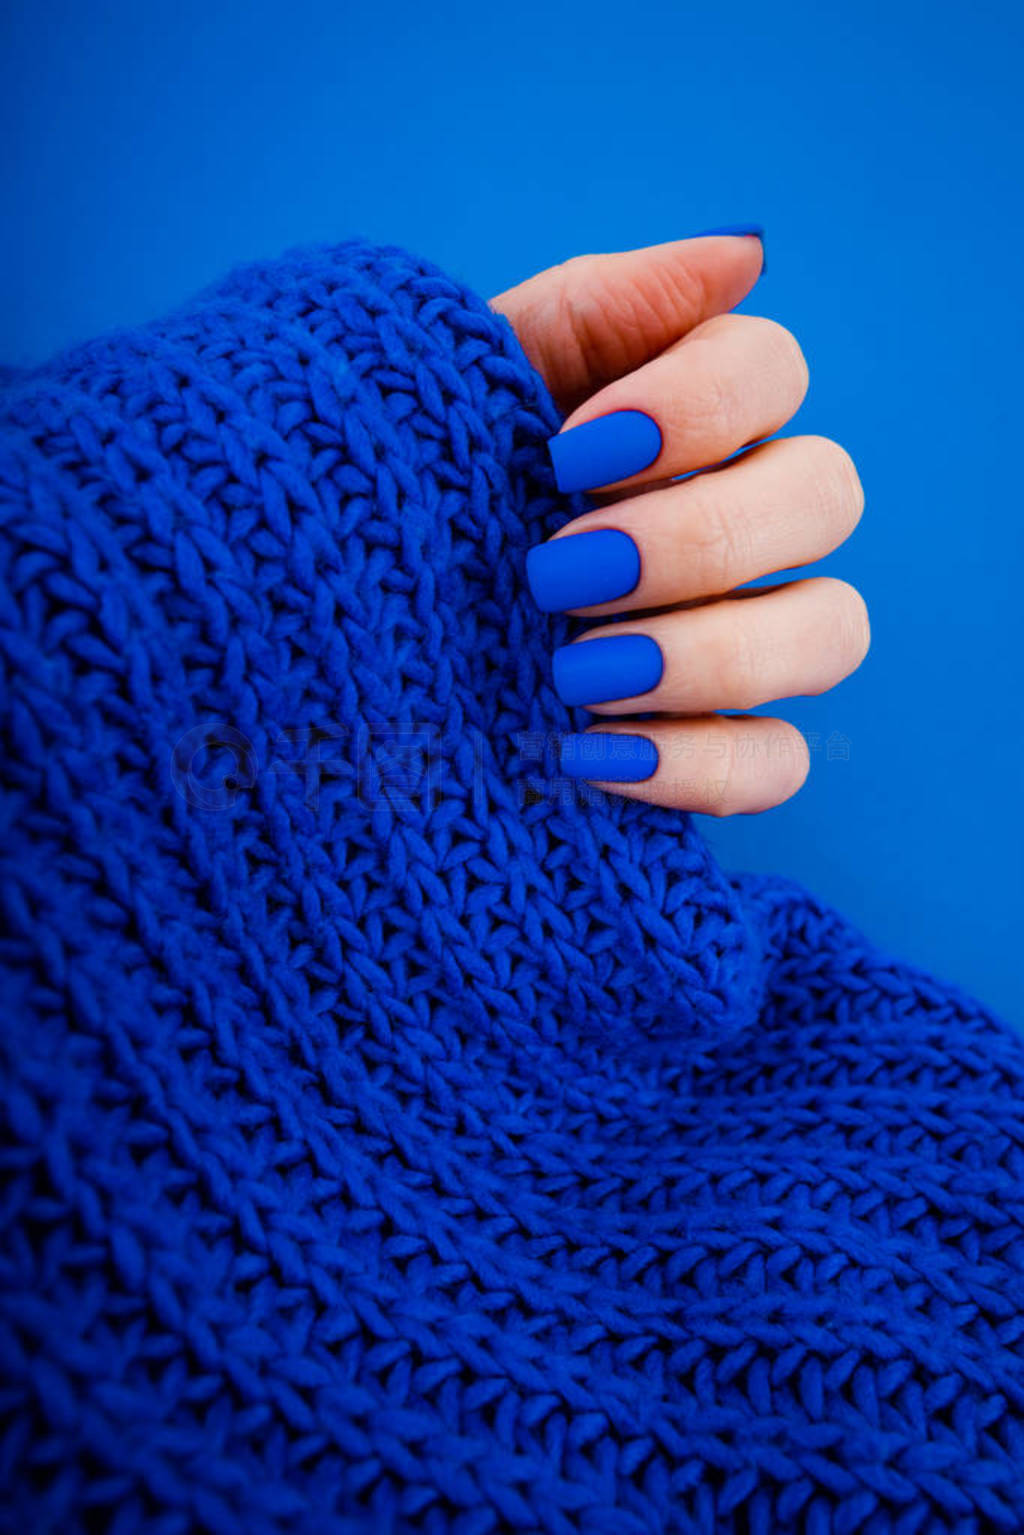 Blue matte manicure on a blue background with round blue glasses